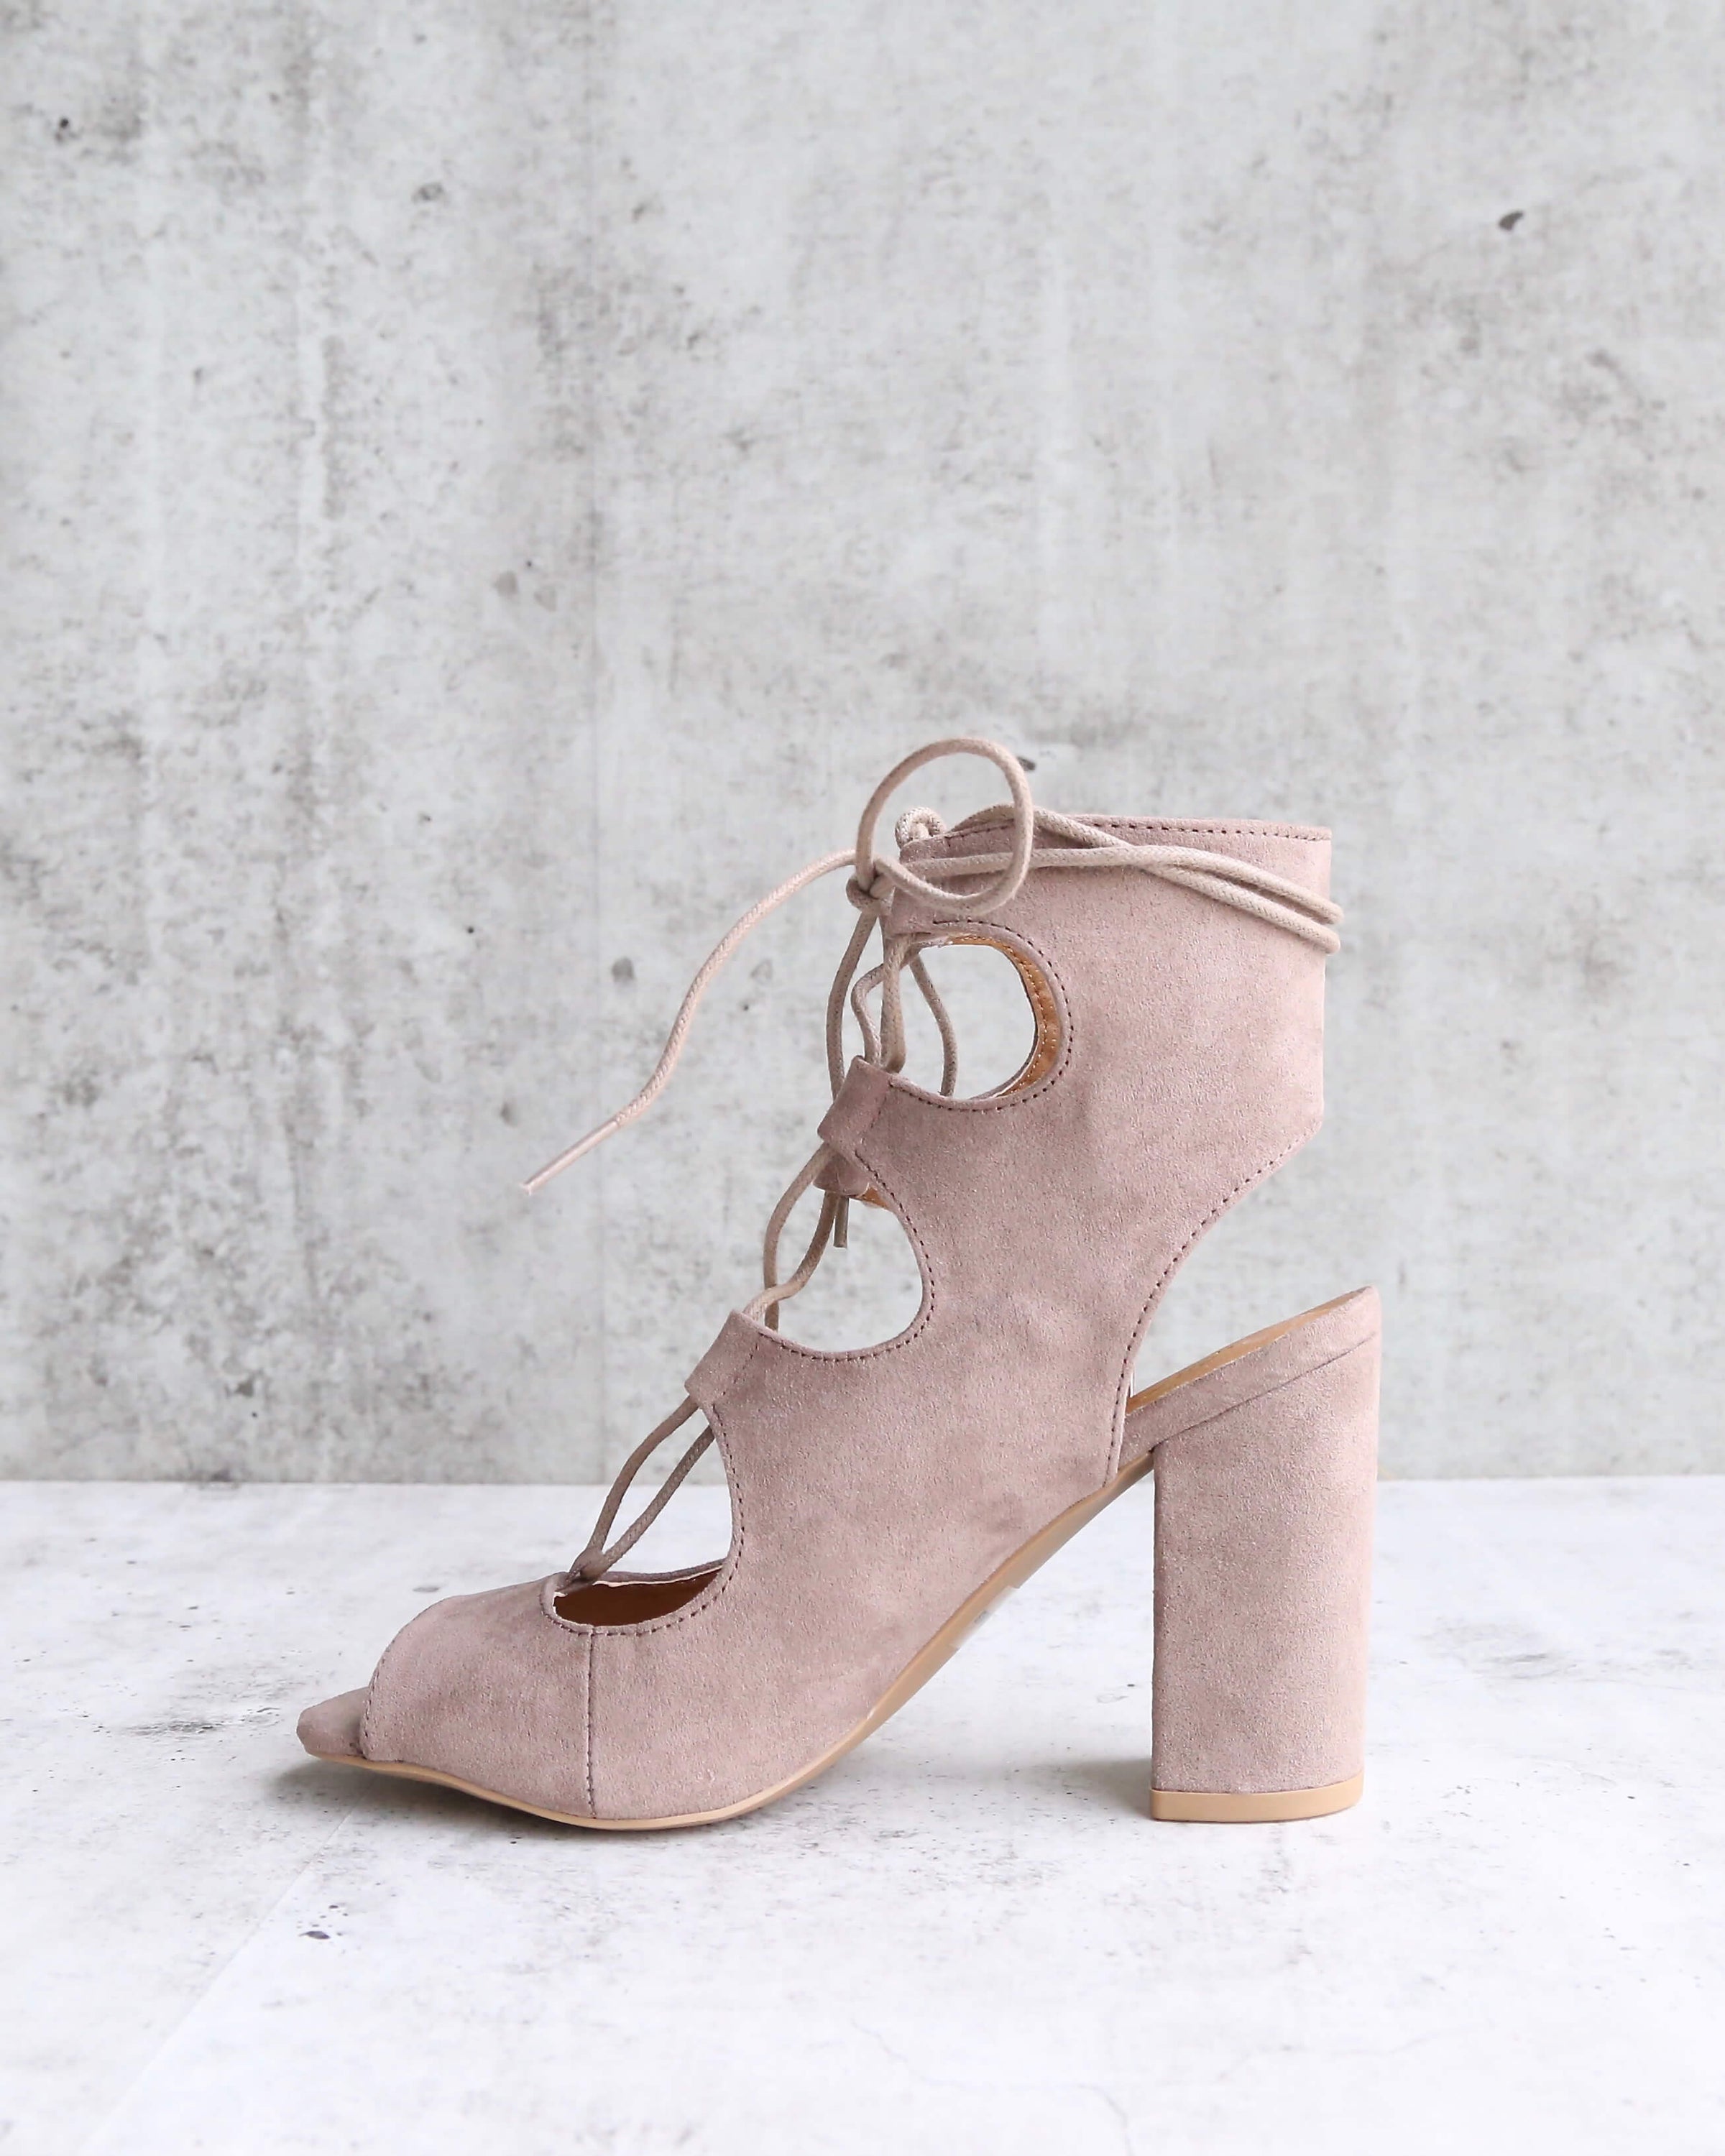 tan suede lace up heels